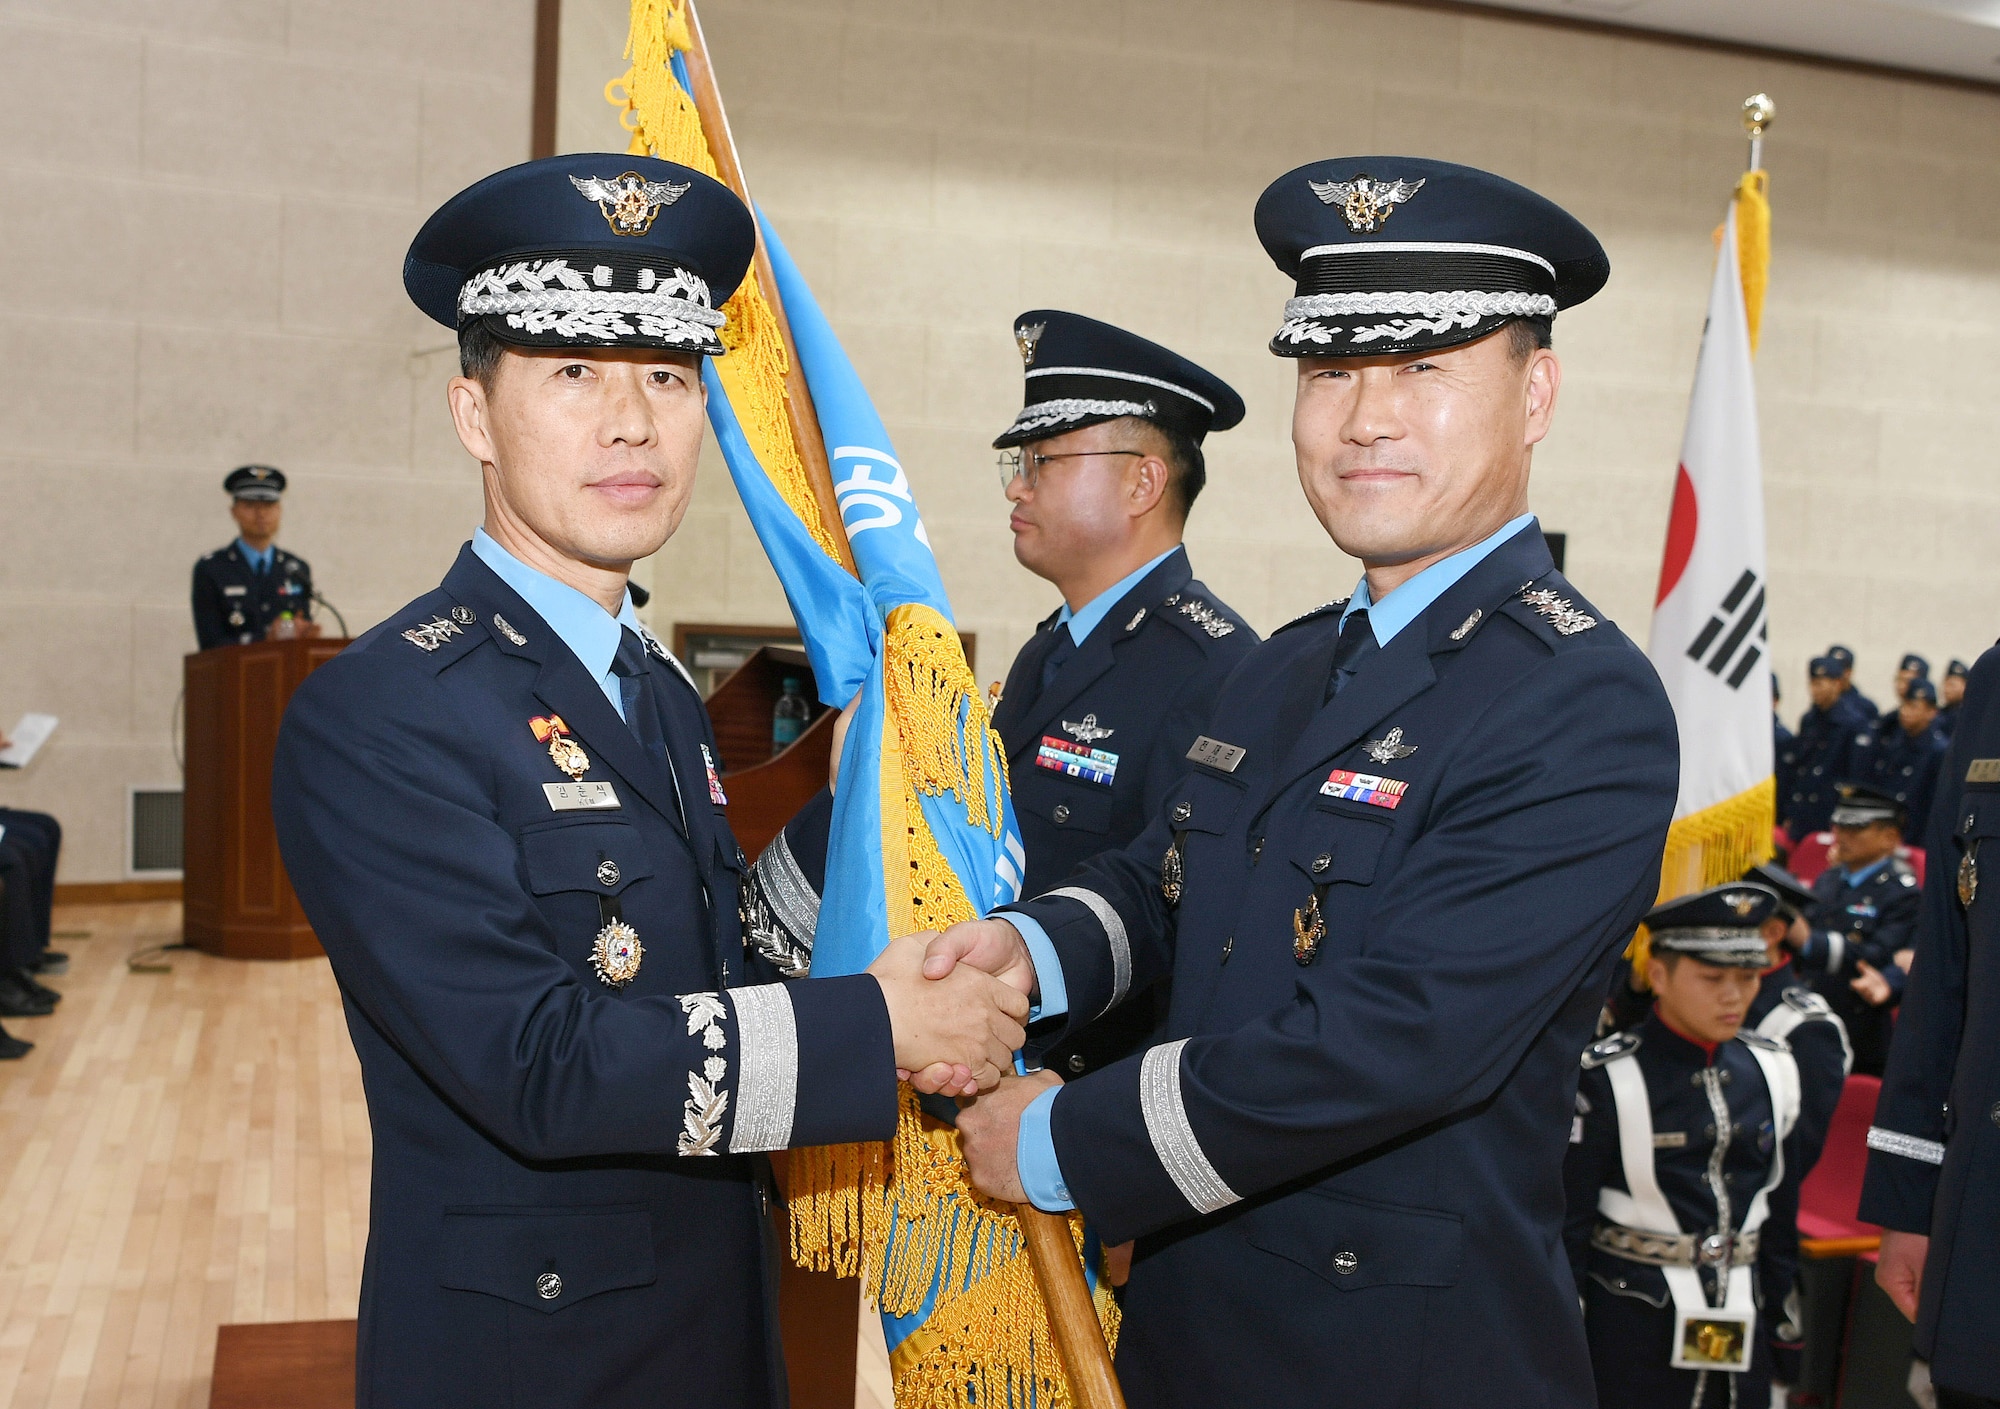 Republic of Korea Maj. Gen. Jun-sik Kim, Air Combat Command commander, shakes the hand of Col. Jae-Gyun Jeon, 38th Fighter Group commander “Thor”, during the change of command ceremony at Kunsan Air Base, RoK, Jan. 17, 2018.  Similar to the U.S. military tradition, the Korean change of command ceremony represents a formal transfer of authority and responsibility. (Courtesy photo)